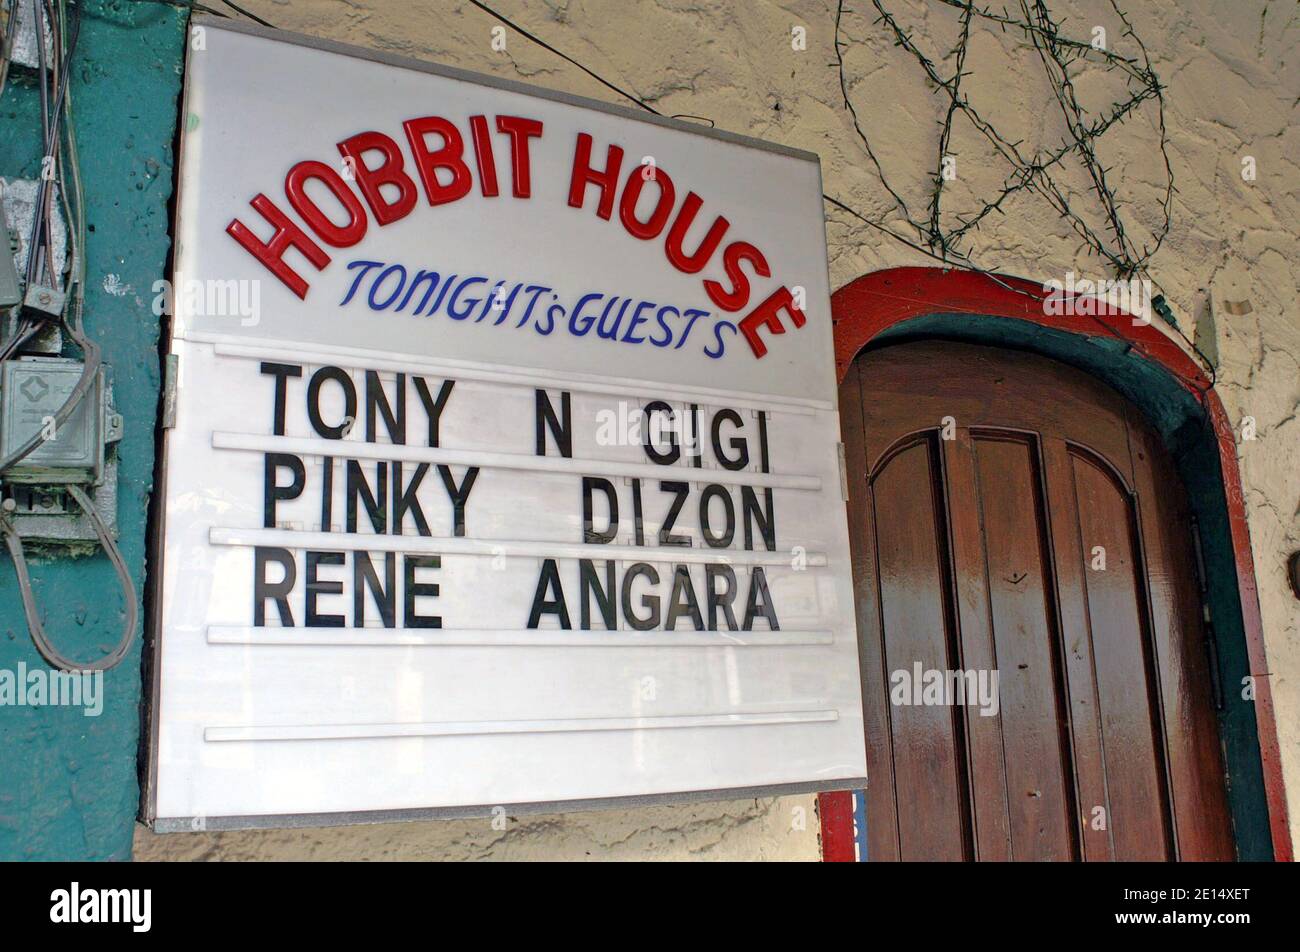 The Hobbit House, opened in 1973, is a Tolkien-inspired restaurant and bar known for its theme which includes 'small people' employees.  Originally located on Mabini Street in the Ermita District of Manila, the establishment was opened by Jim Turner, a Peace Corps Volunteer from Iowa, who recruited small people, or politically incorrectly called dwarfs, to run the establishment.  The Hobbit House eventually moved to M.H. del Pilar Street before shutting down.  The 2005 photo is of the Hobbit House outside sign, on Mabini Street, advertising its entertainment for the evening. Stock Photo